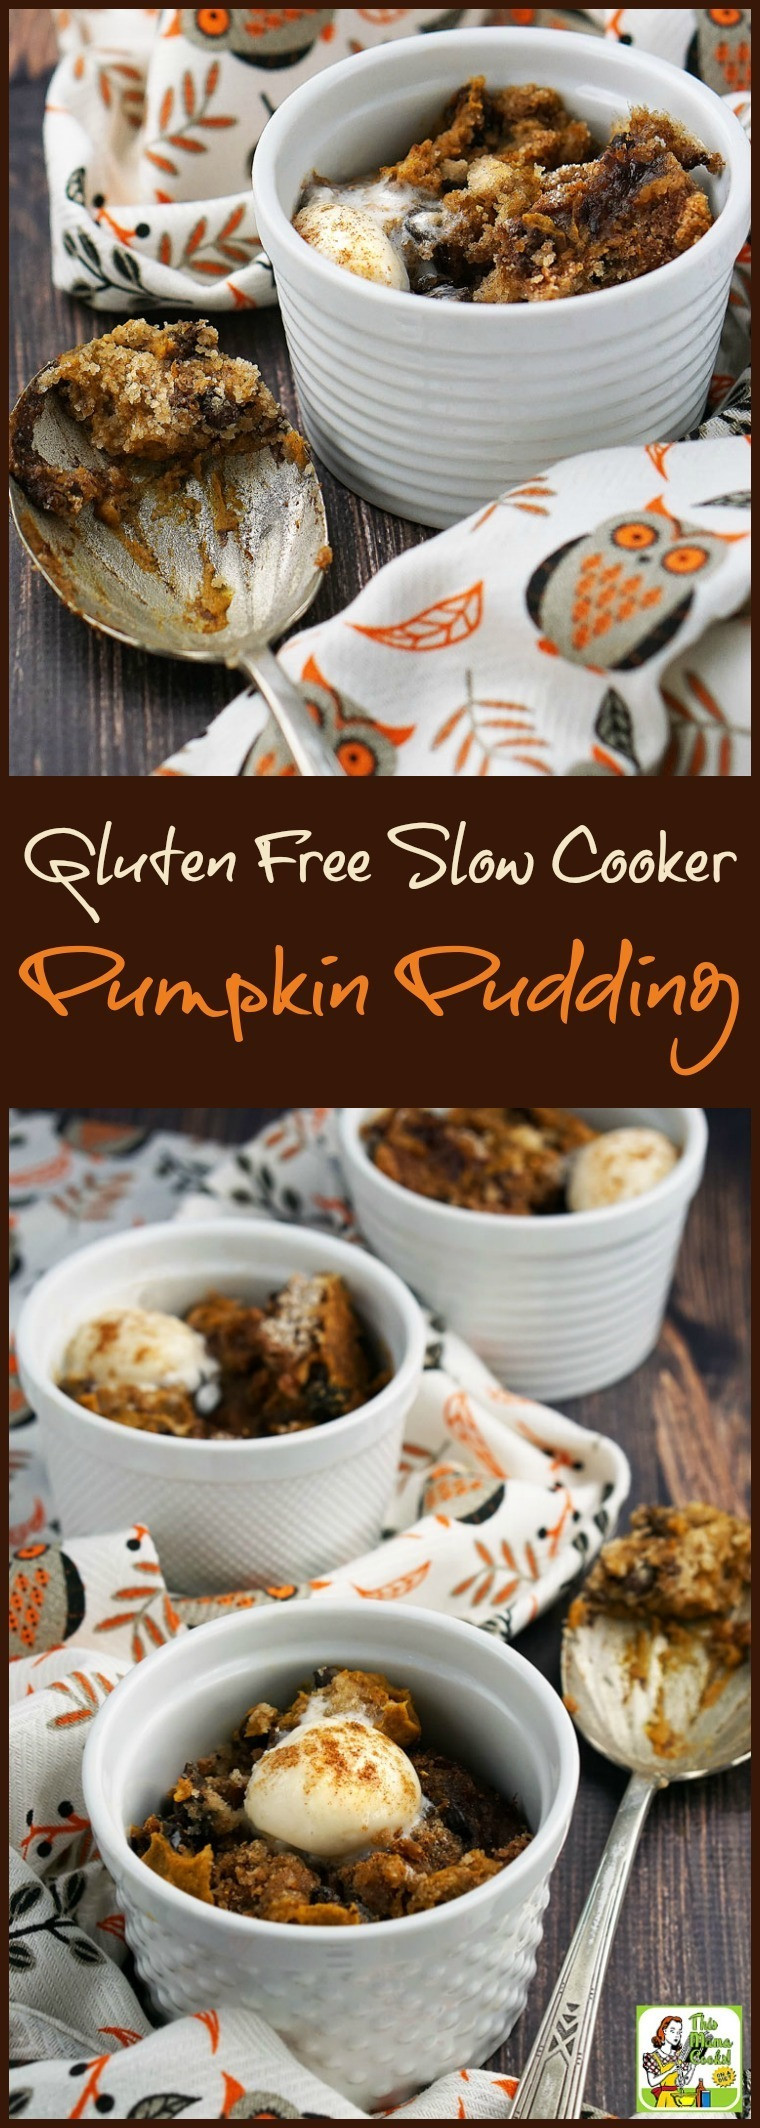 Gluten Free Dairy Free Slow Cooker Recipes
 Gluten Free Slow Cooker Pumpkin Pudding